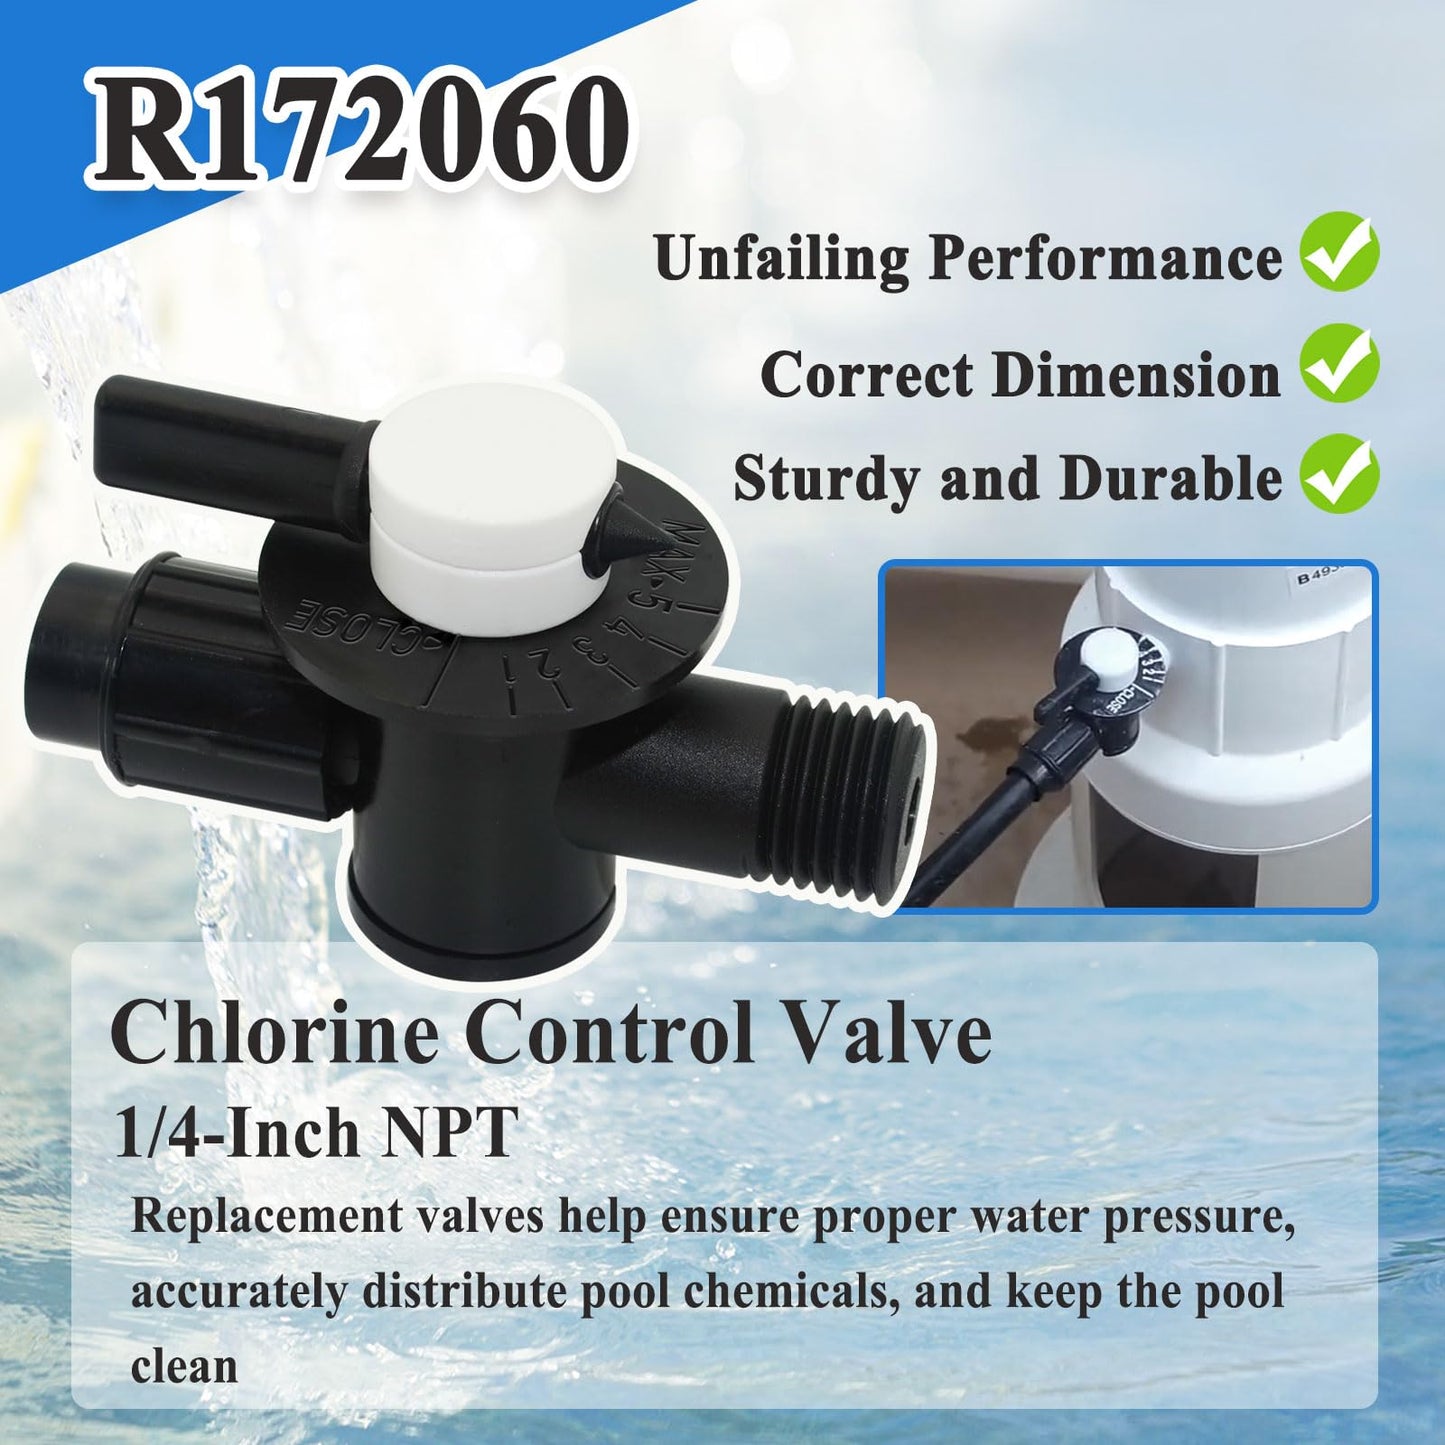 R172060 1/4-inch NPT Control Valve Replacement Part for Automatic Chlorine/Bromine Pool and Spa Feeder Models 300, 302, 300-19, and 300-29